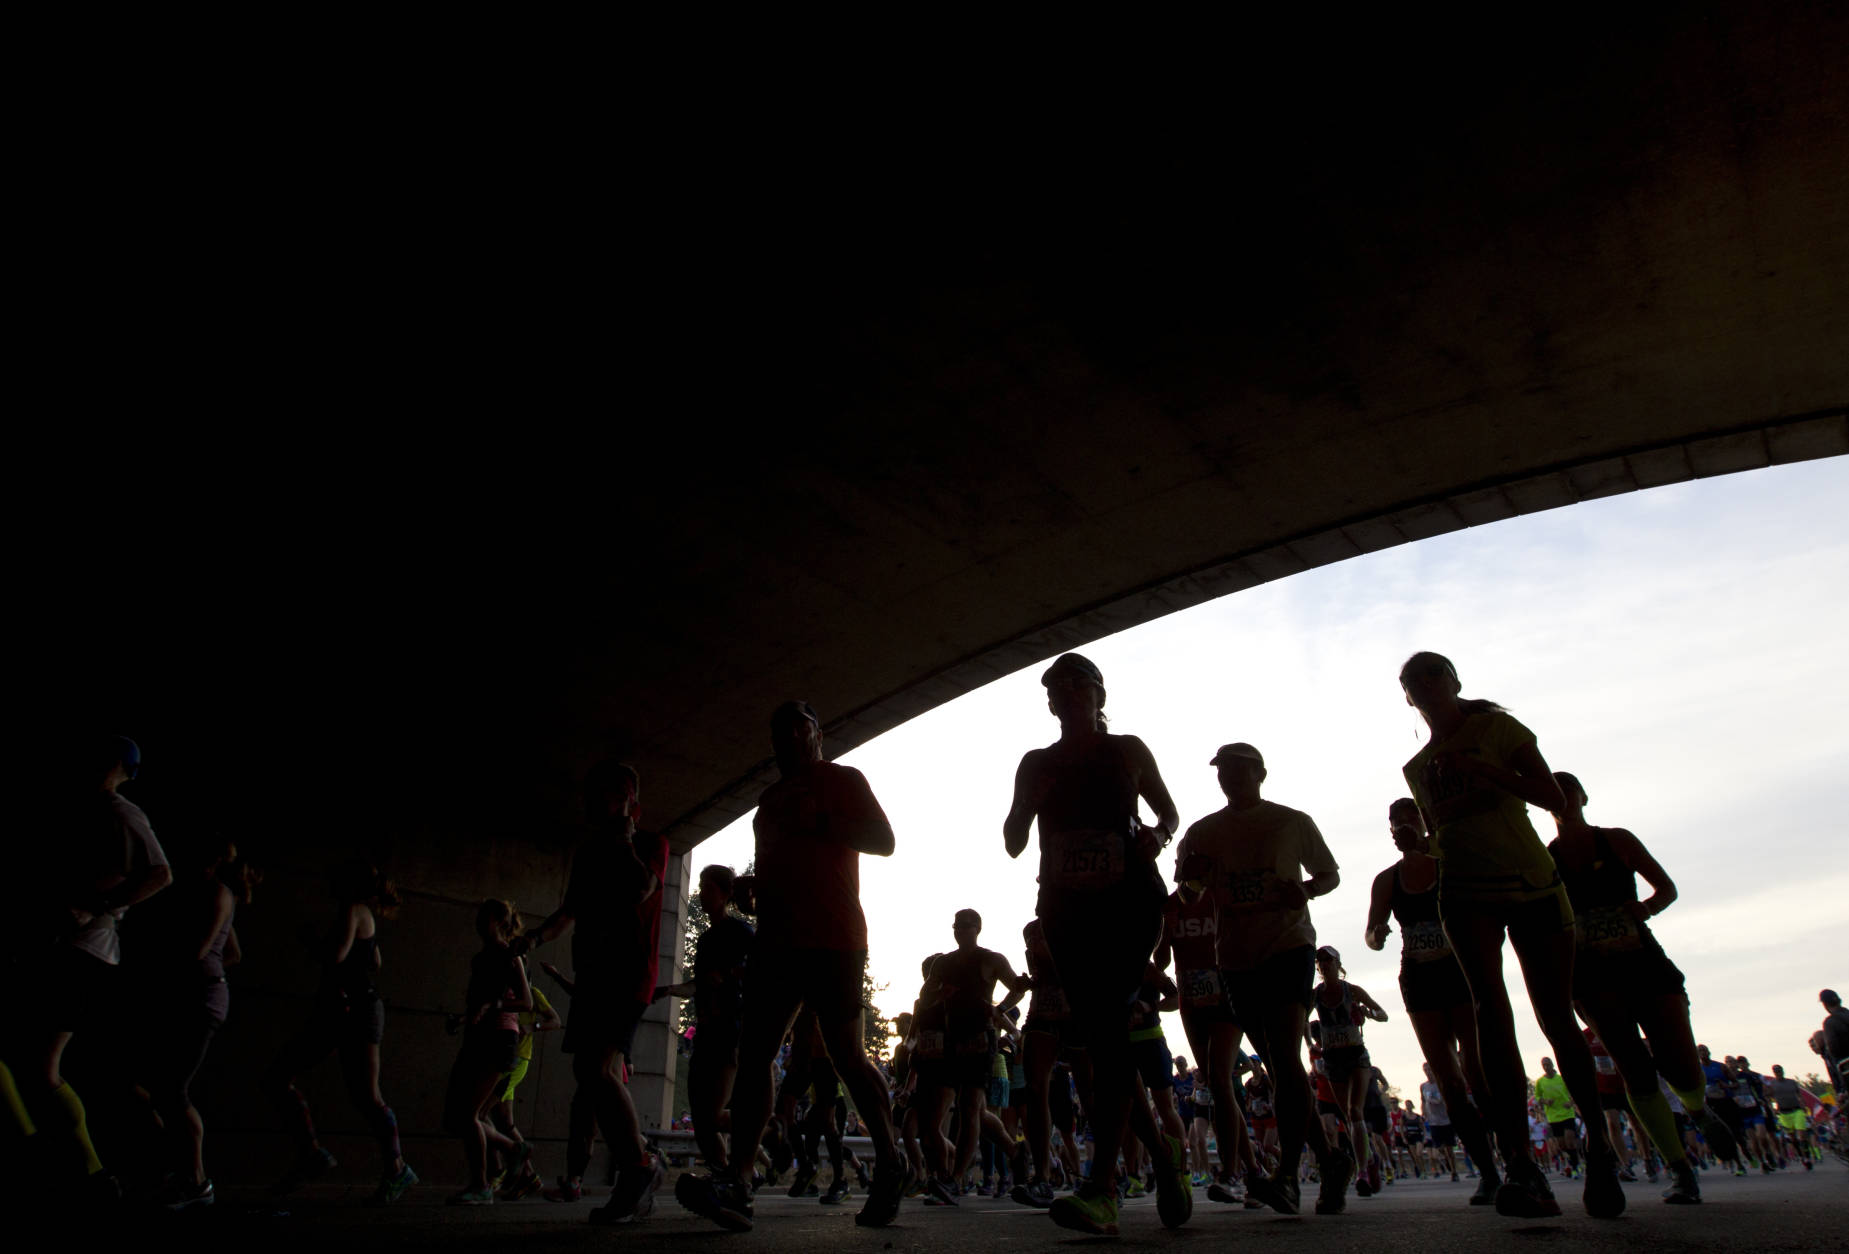 Runners begin running of the 41st Marine Corps Marathon, Sunday, Oct. 30, 2016 in Arlington, Va. The race includes runners from 55 nations and each branch of the U.S. armed forces. ( AP Photo/Jose Luis Magana)